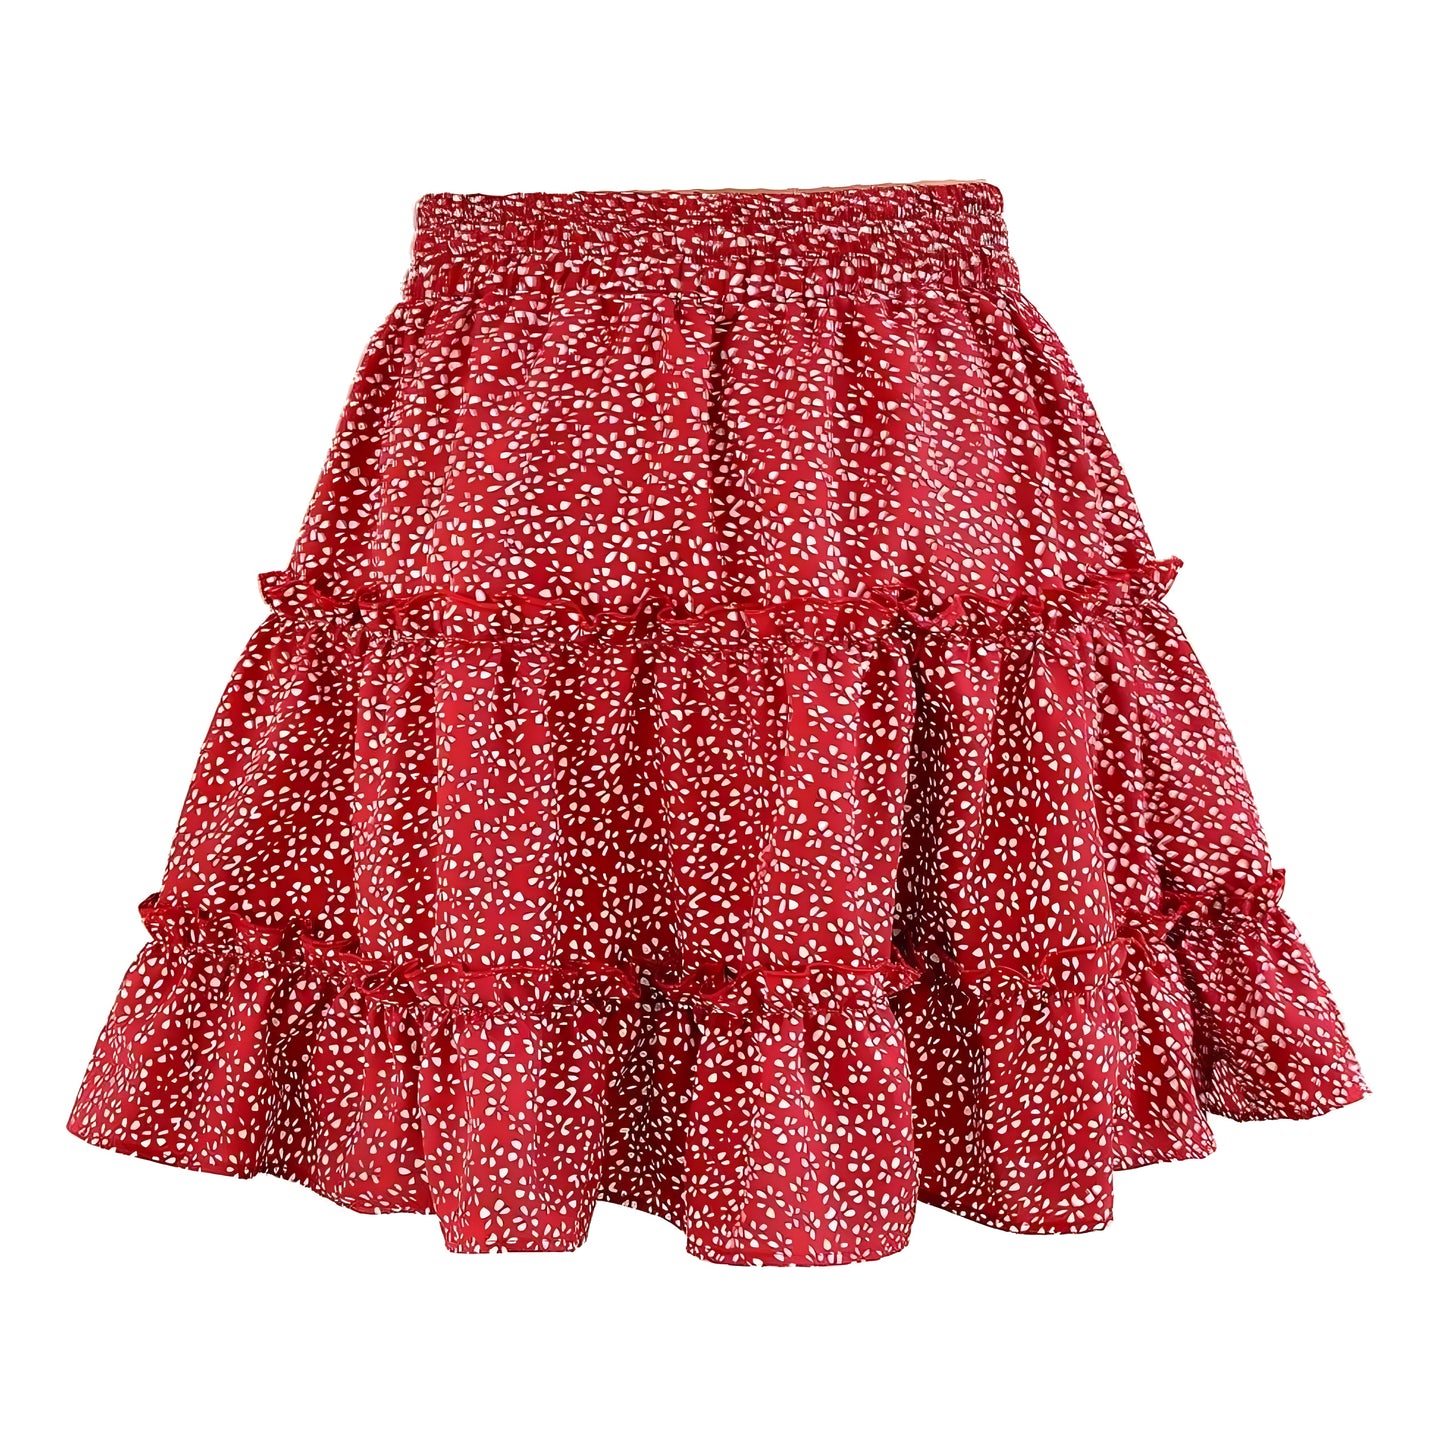 floral-print-red-and-white-hibiscus-flower-patterned-layered-ruffle-trim-draw-string-tie-fitted-waist-smocked-mid-high-rise-waisted-flowy-boho-tullie-linen-tiered-short-mini-skirt-women-ladies-chic-trendy-spring-2024-summer-elegant-casual-feminine-preppy-style-tropical-hawaiian-beach-wear-zara-altard-state-urban-outfitters-brandy-melville-princess-polly